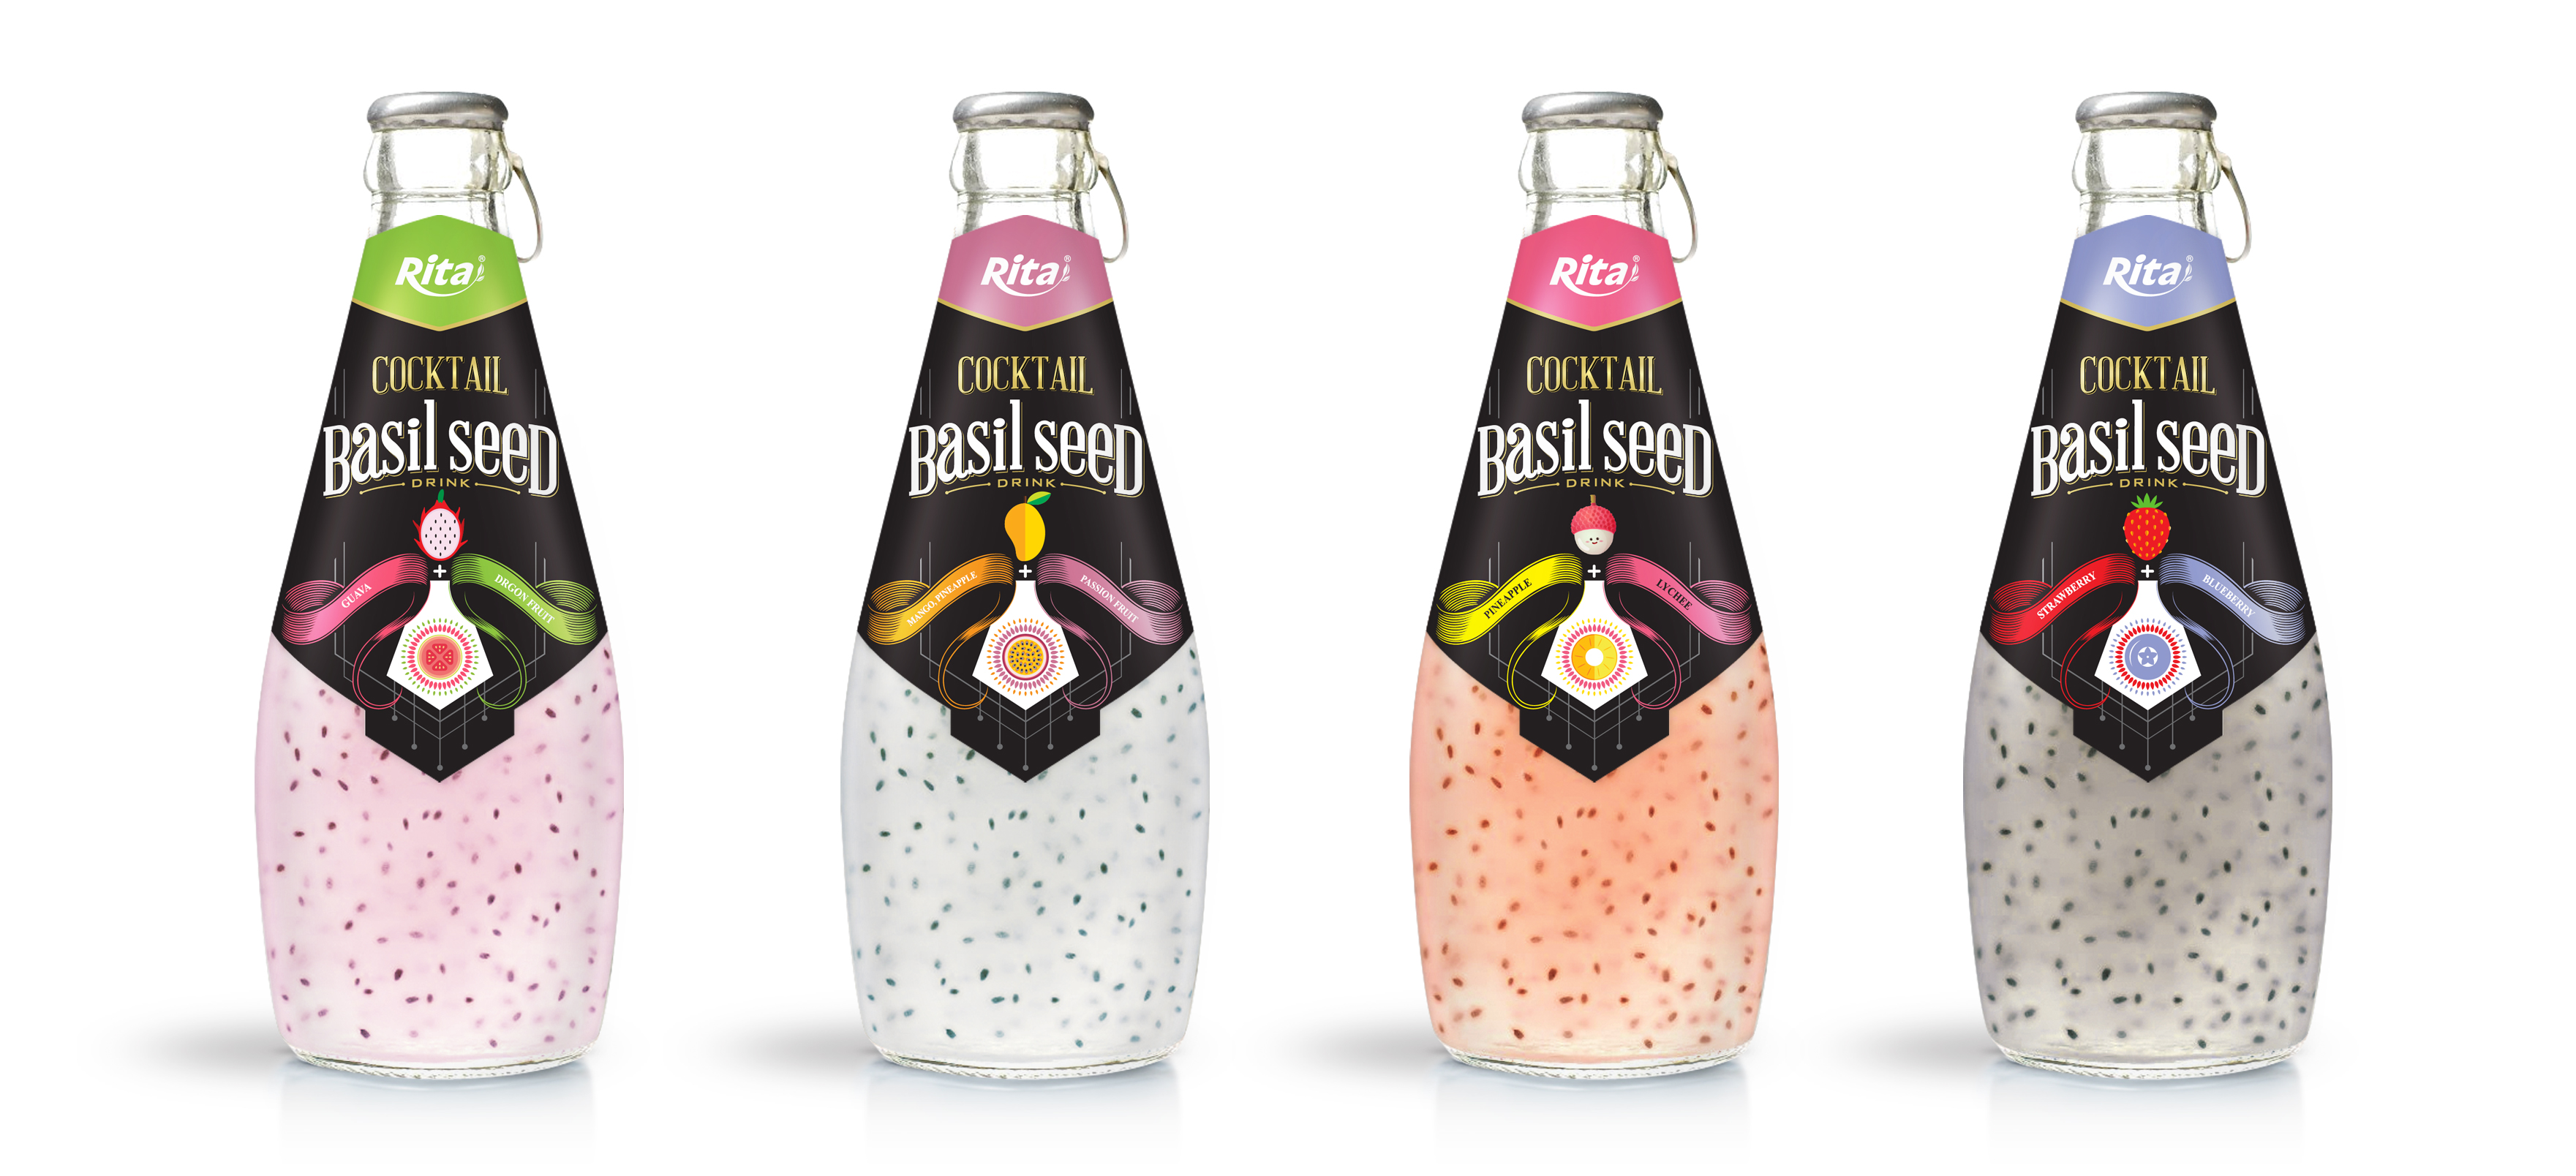 Cocktail flavor with basil seed 290ml glass bottle